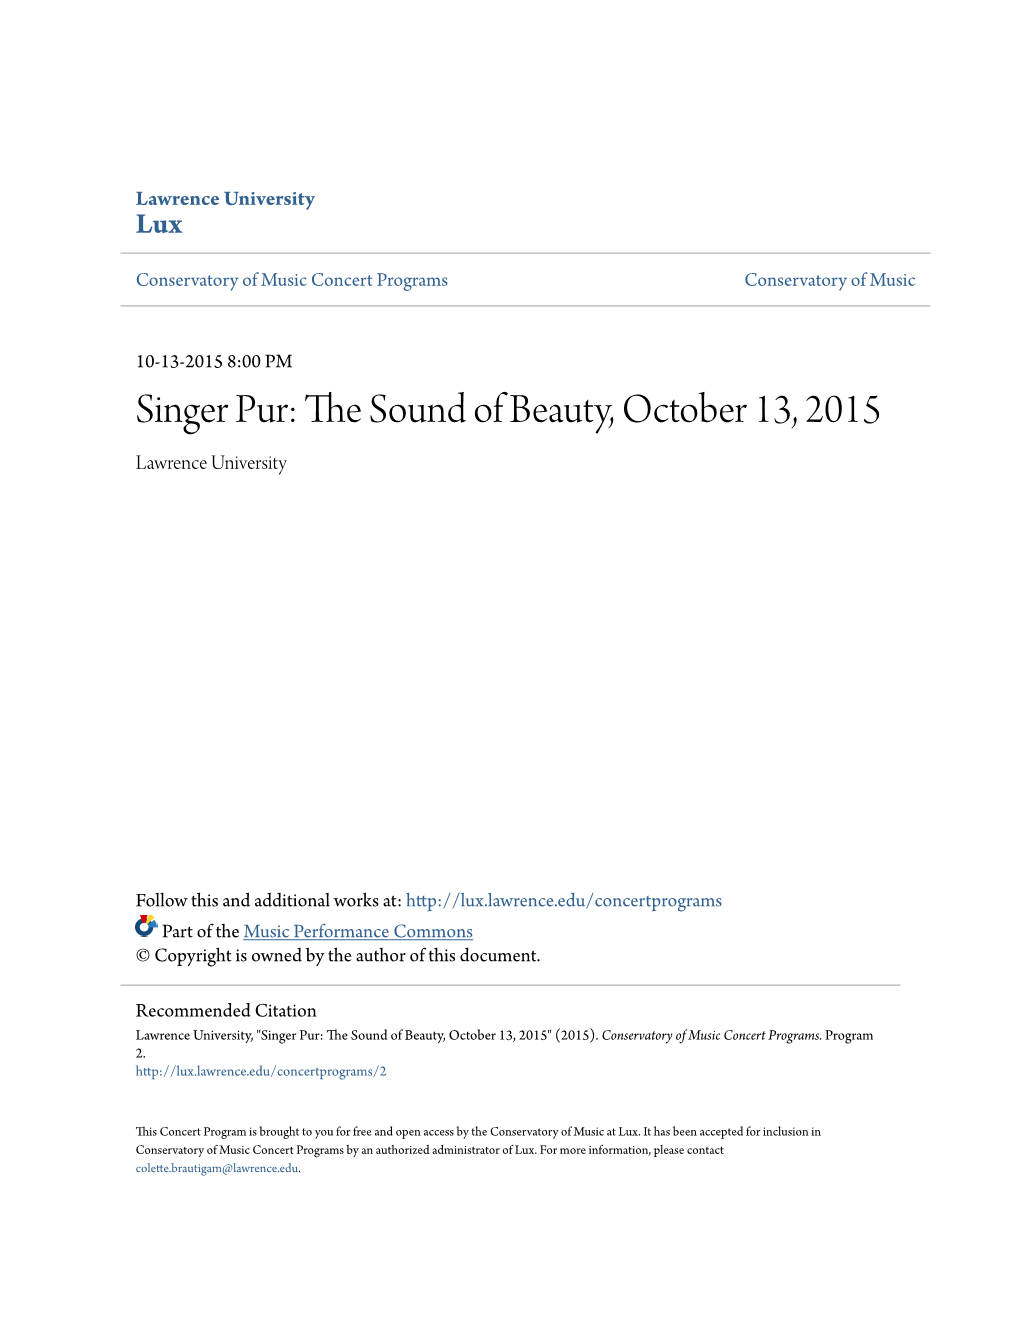 Singer Pur: the Ounds of Beauty, October 13, 2015 Lawrence University